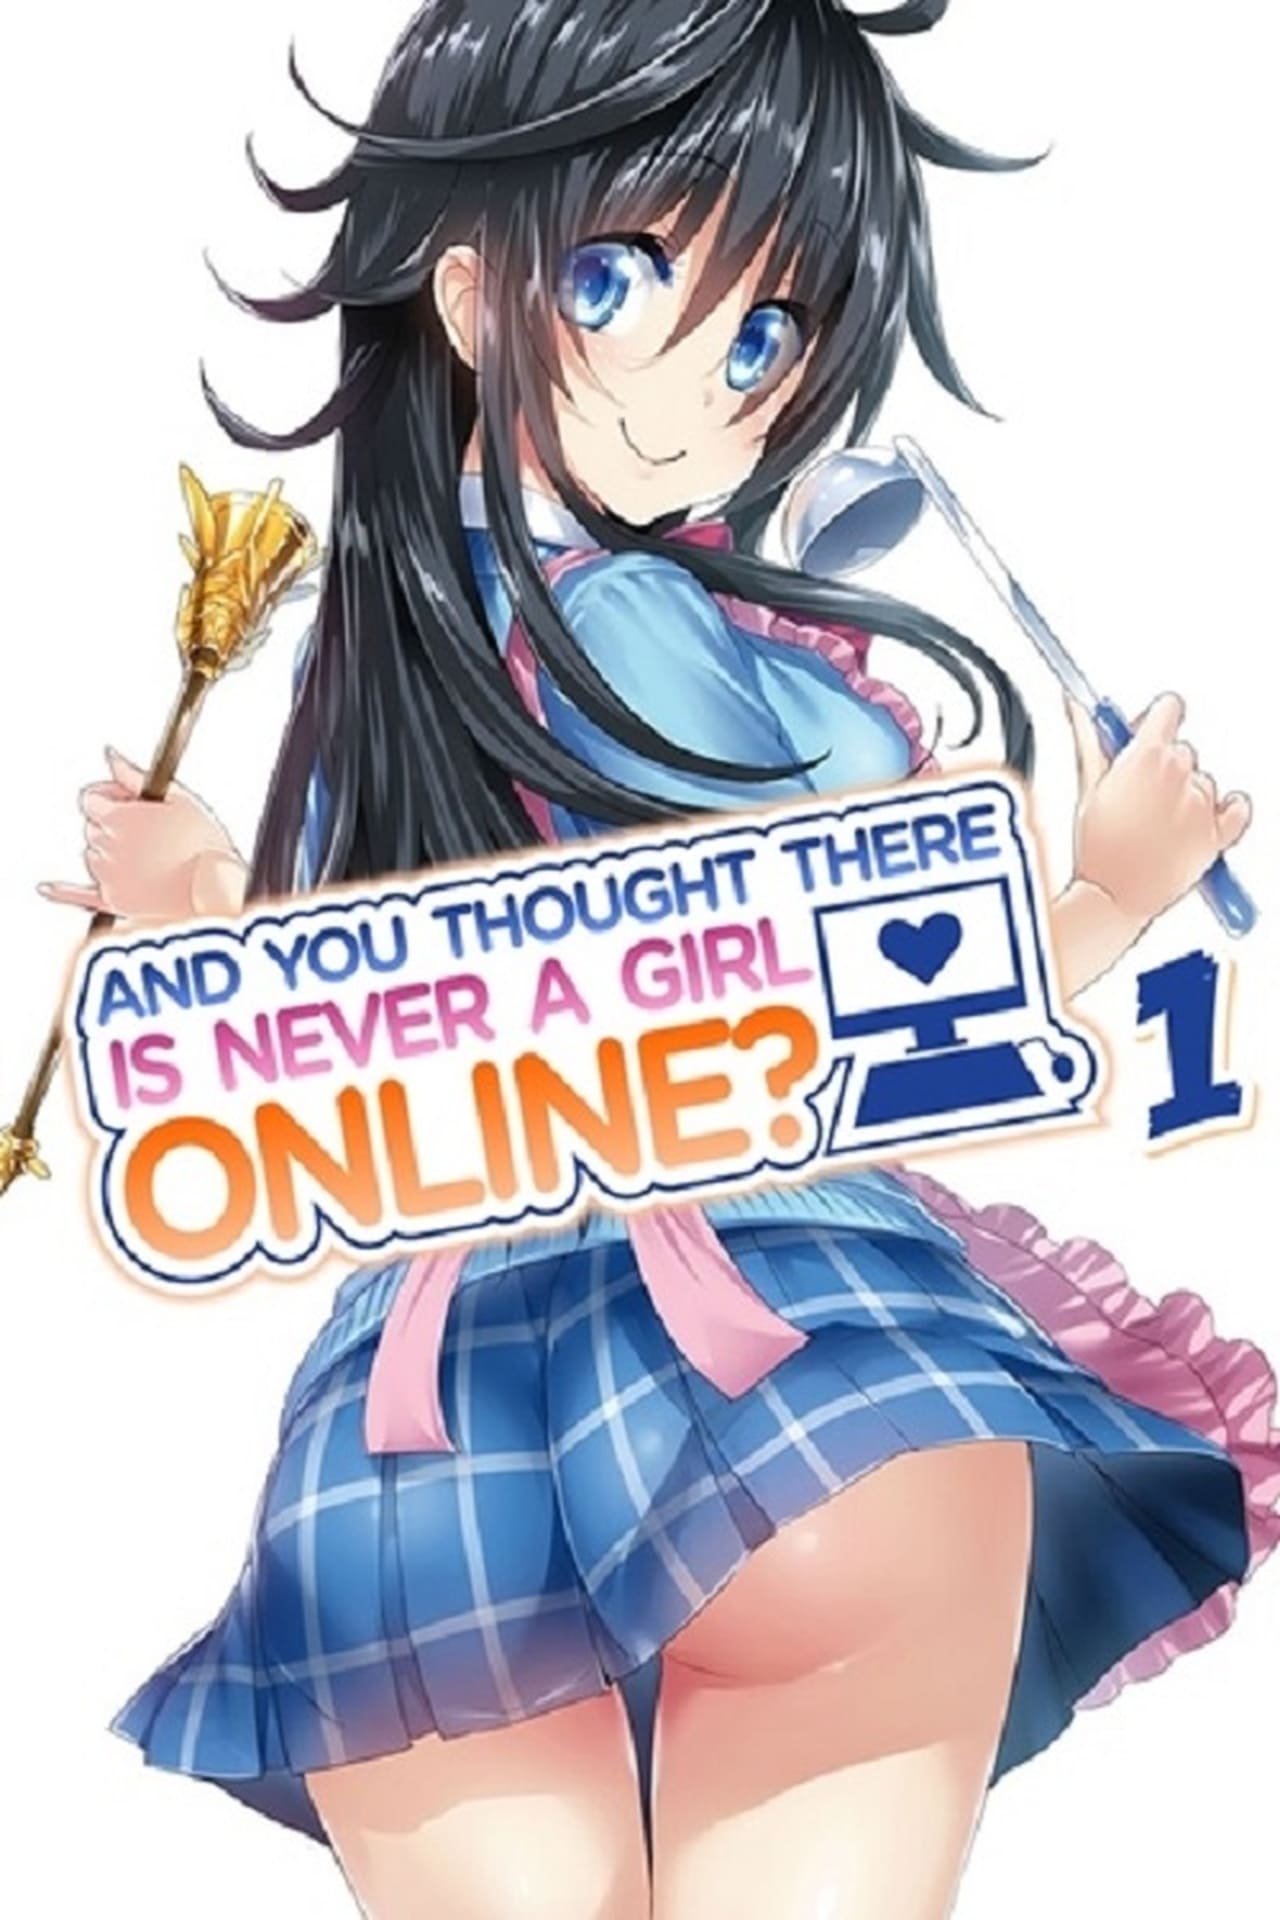  And You Thought There Is Never a Girl Online